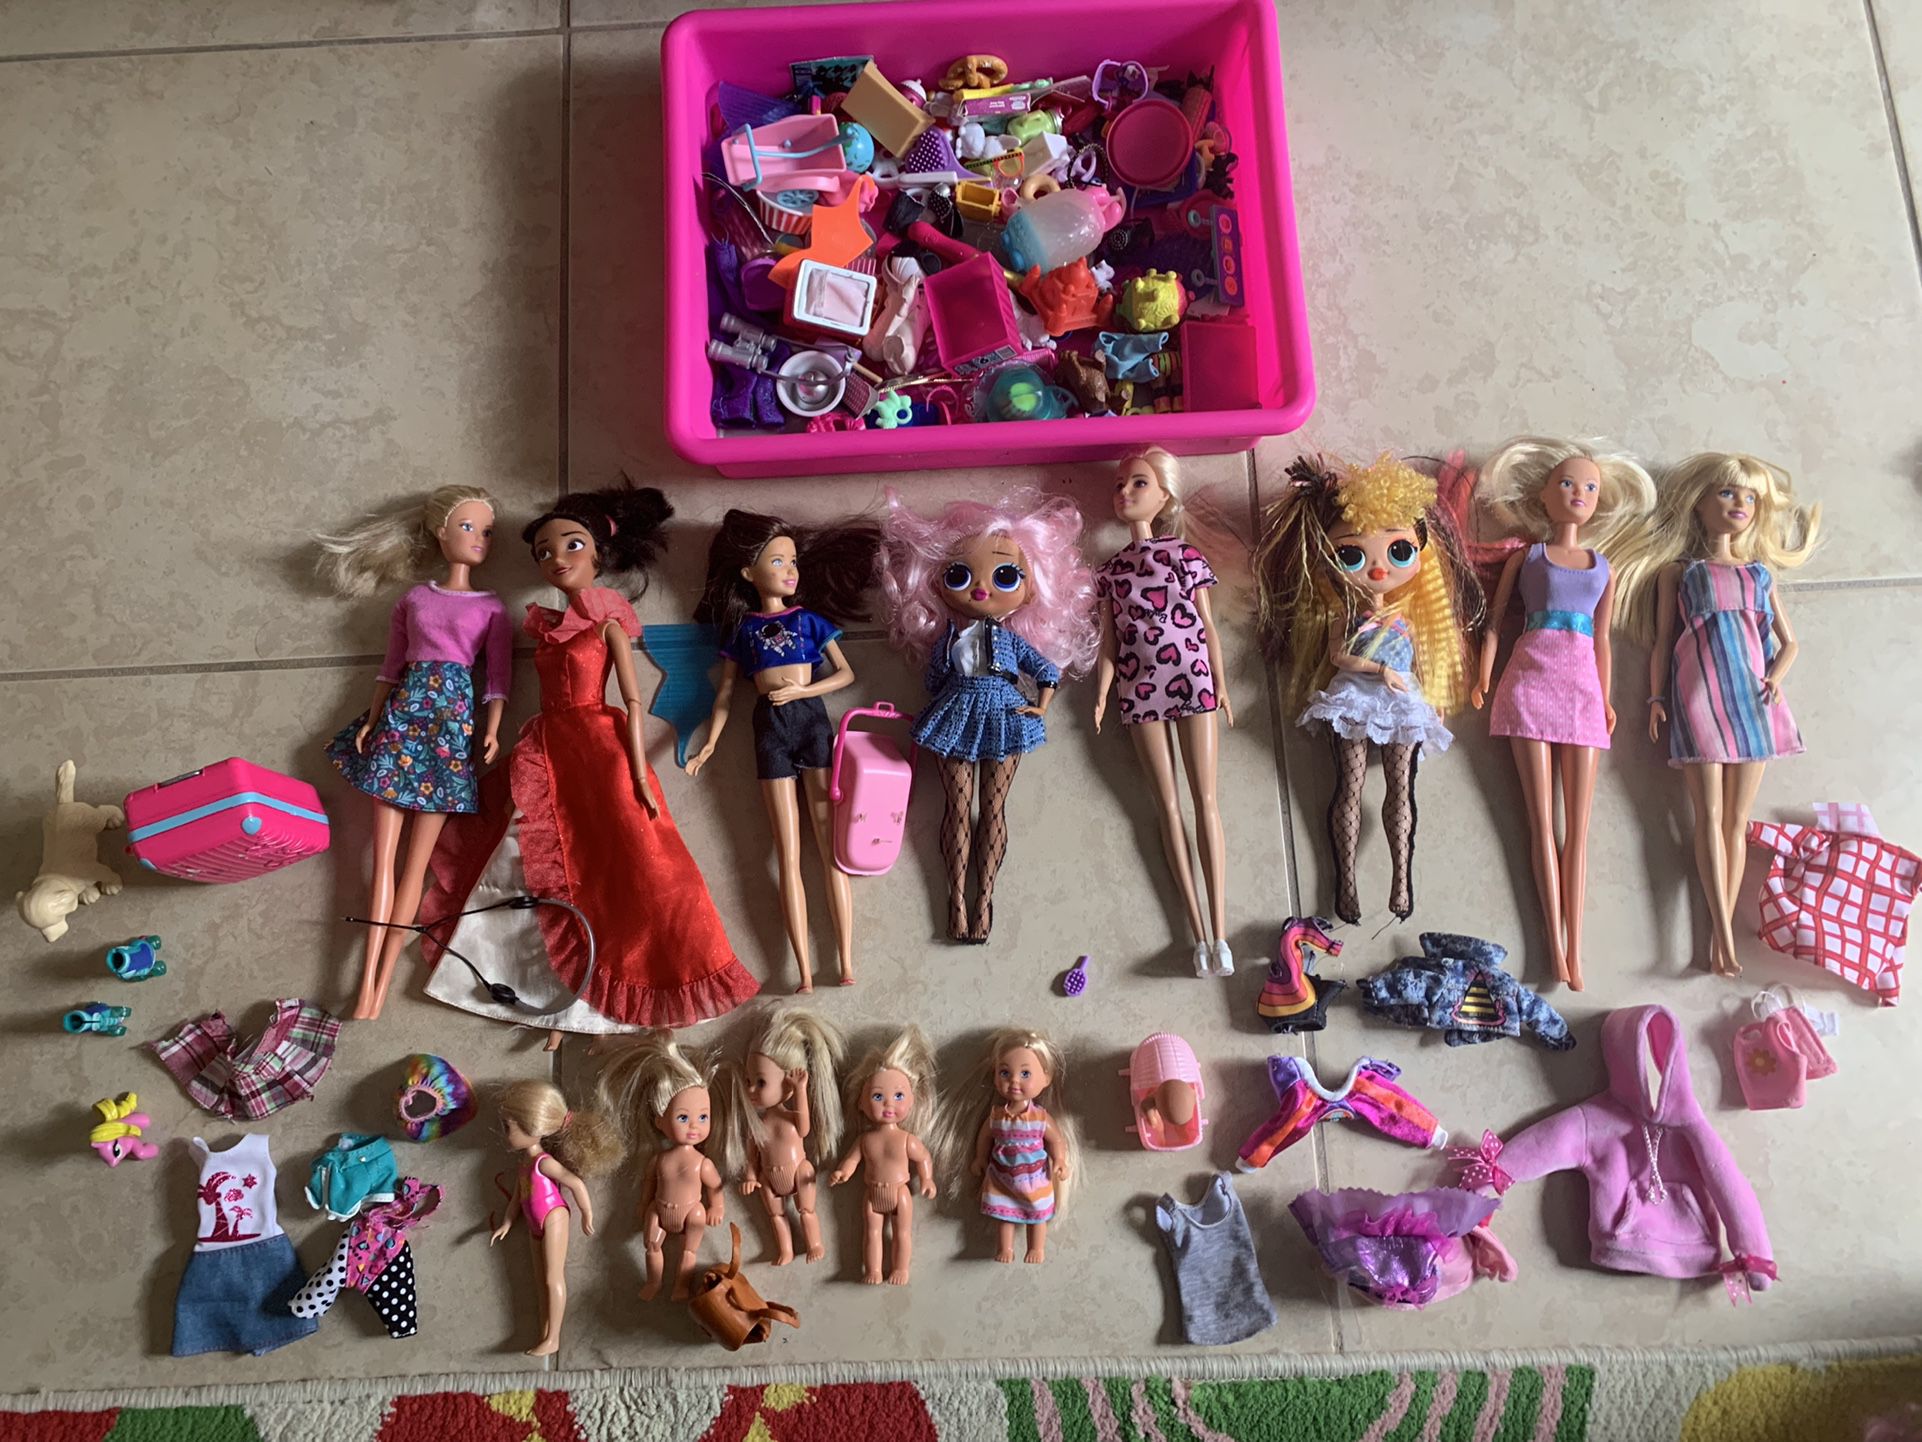 A Nice OMG Collection Of Dolls With Their Clothes ,dresses And Accessories .